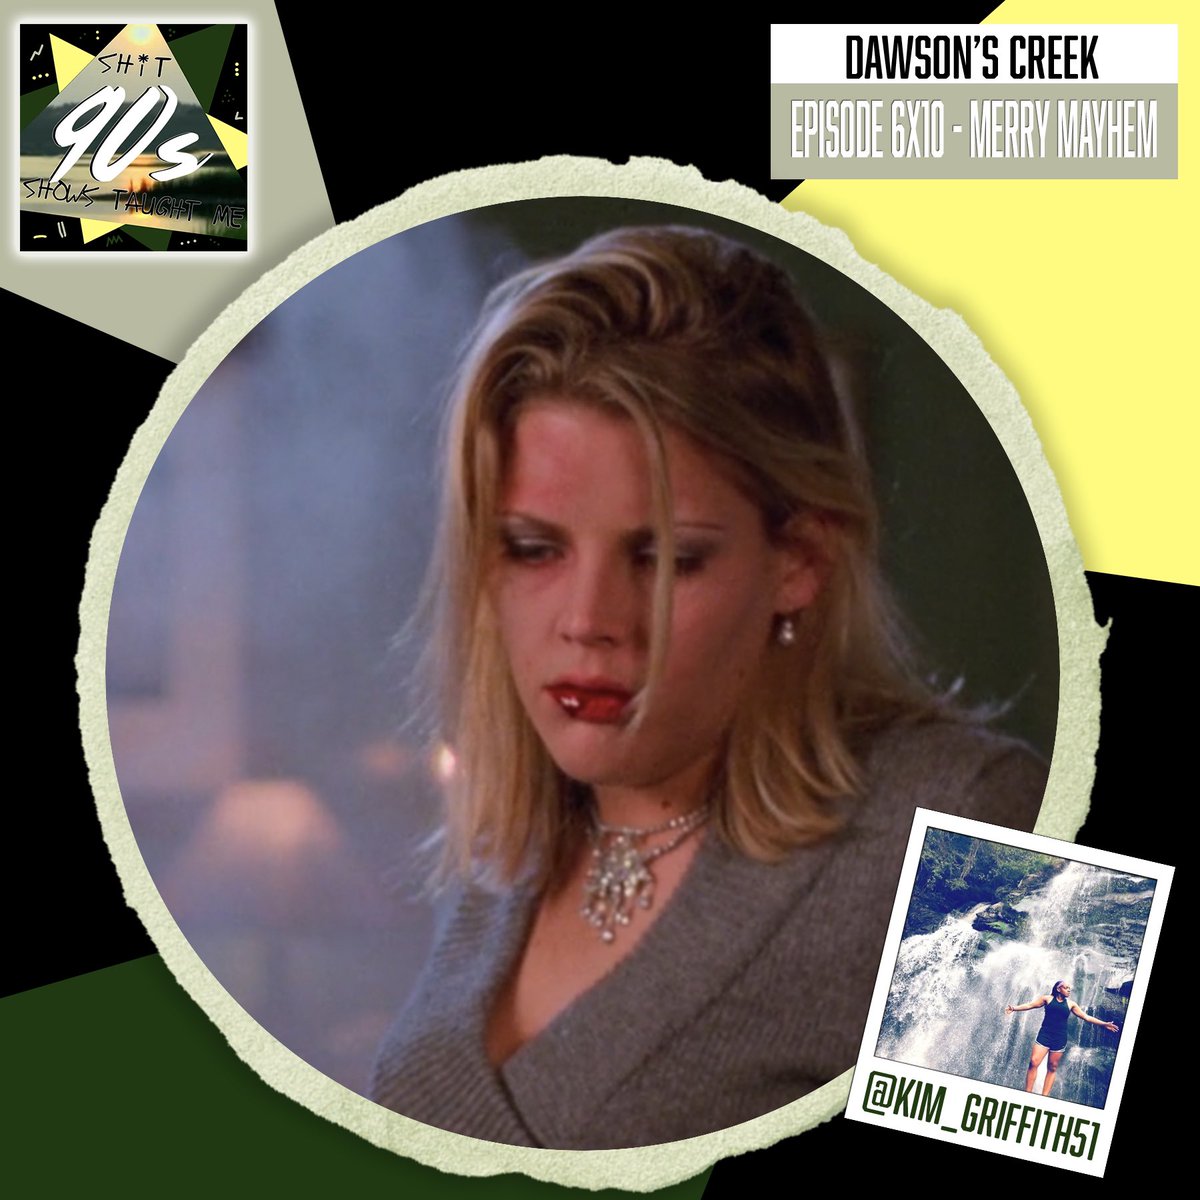 Join us as we recap S6E10 of #DawsonsCreek, “Merry Mayhem” with special guest, Kimmy (@shipsonly4fun)!

We discuss Audrey's breakdown, Oliver's puffy vest, and the return of Mr. Pott...er.